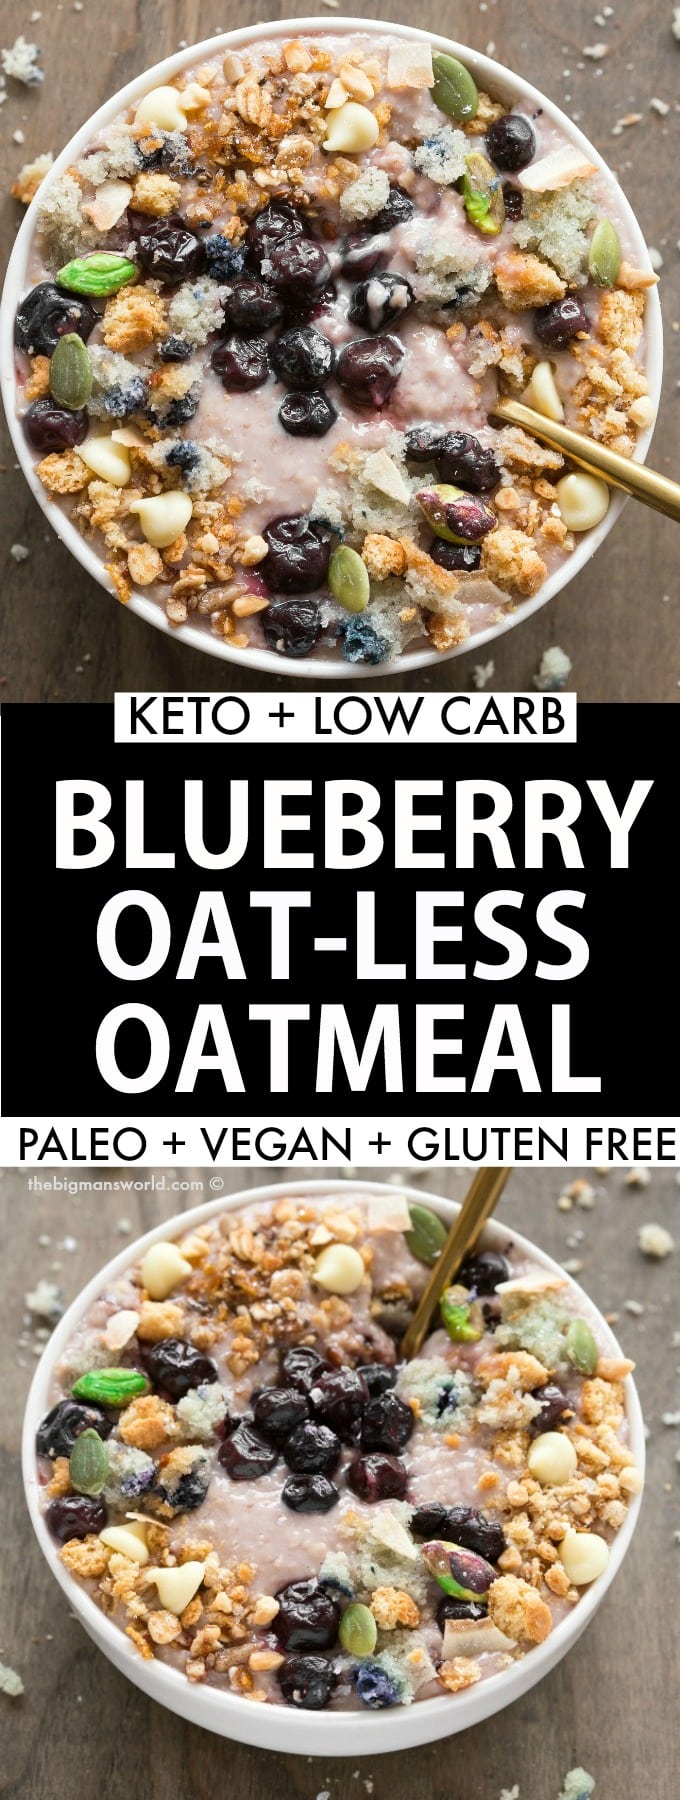 Keto Low Carb Overnight Blueberry Oatmeal recipe